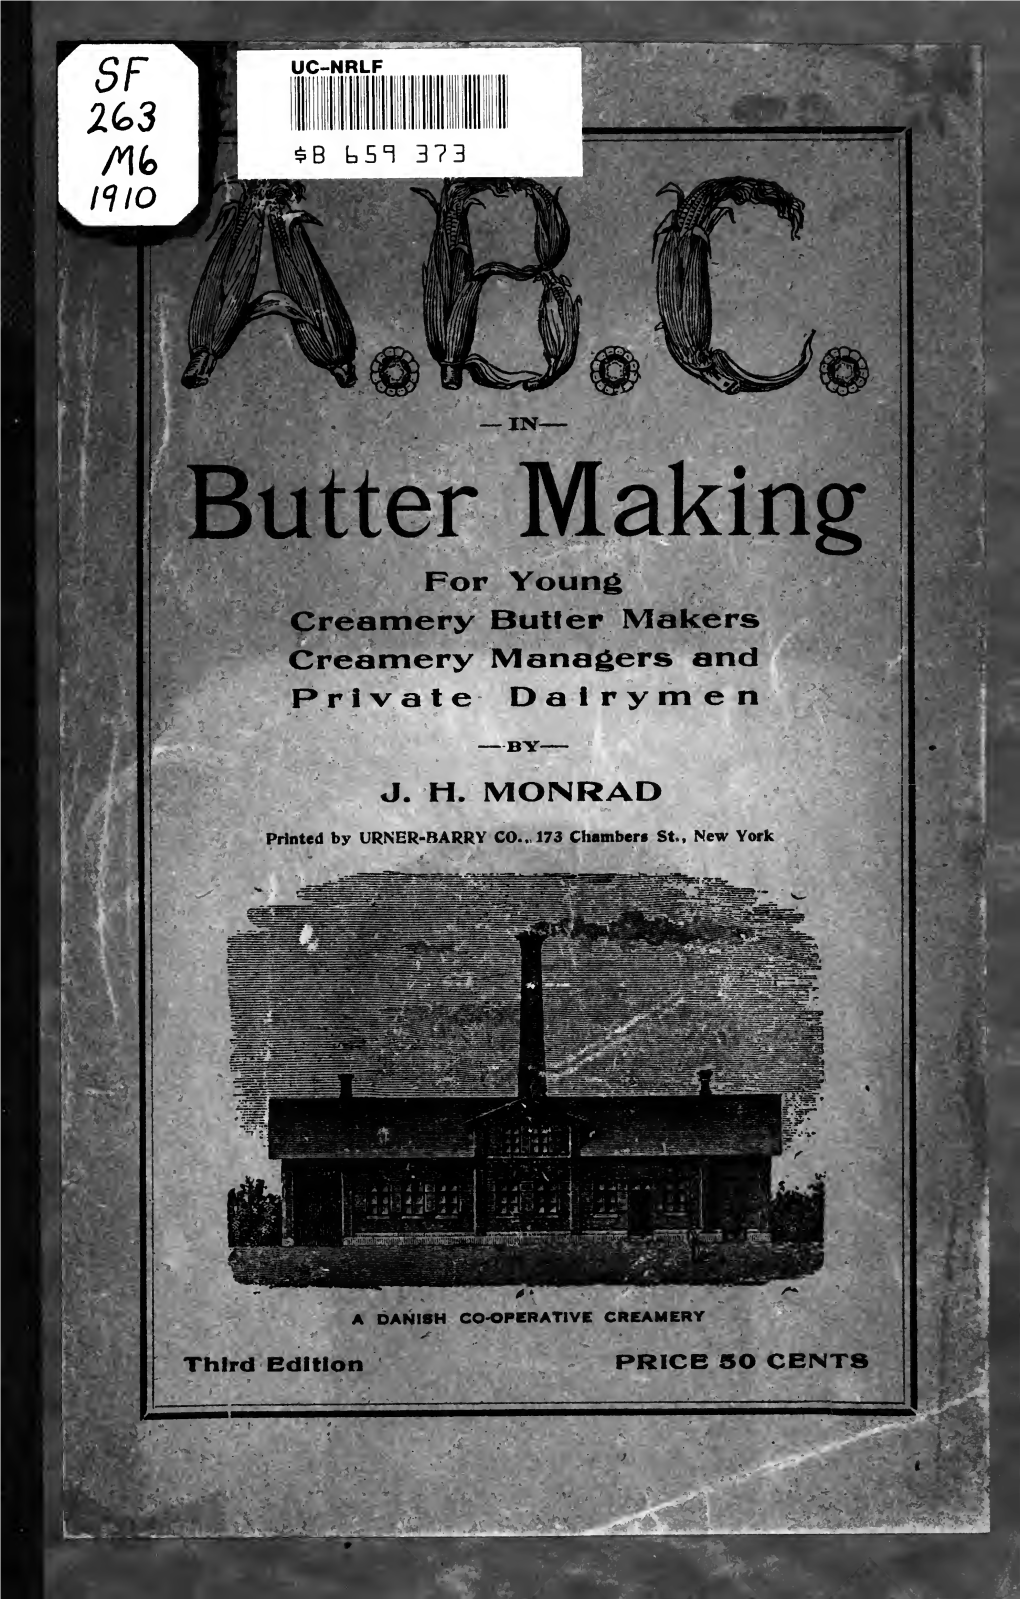 ABC in Butter Making